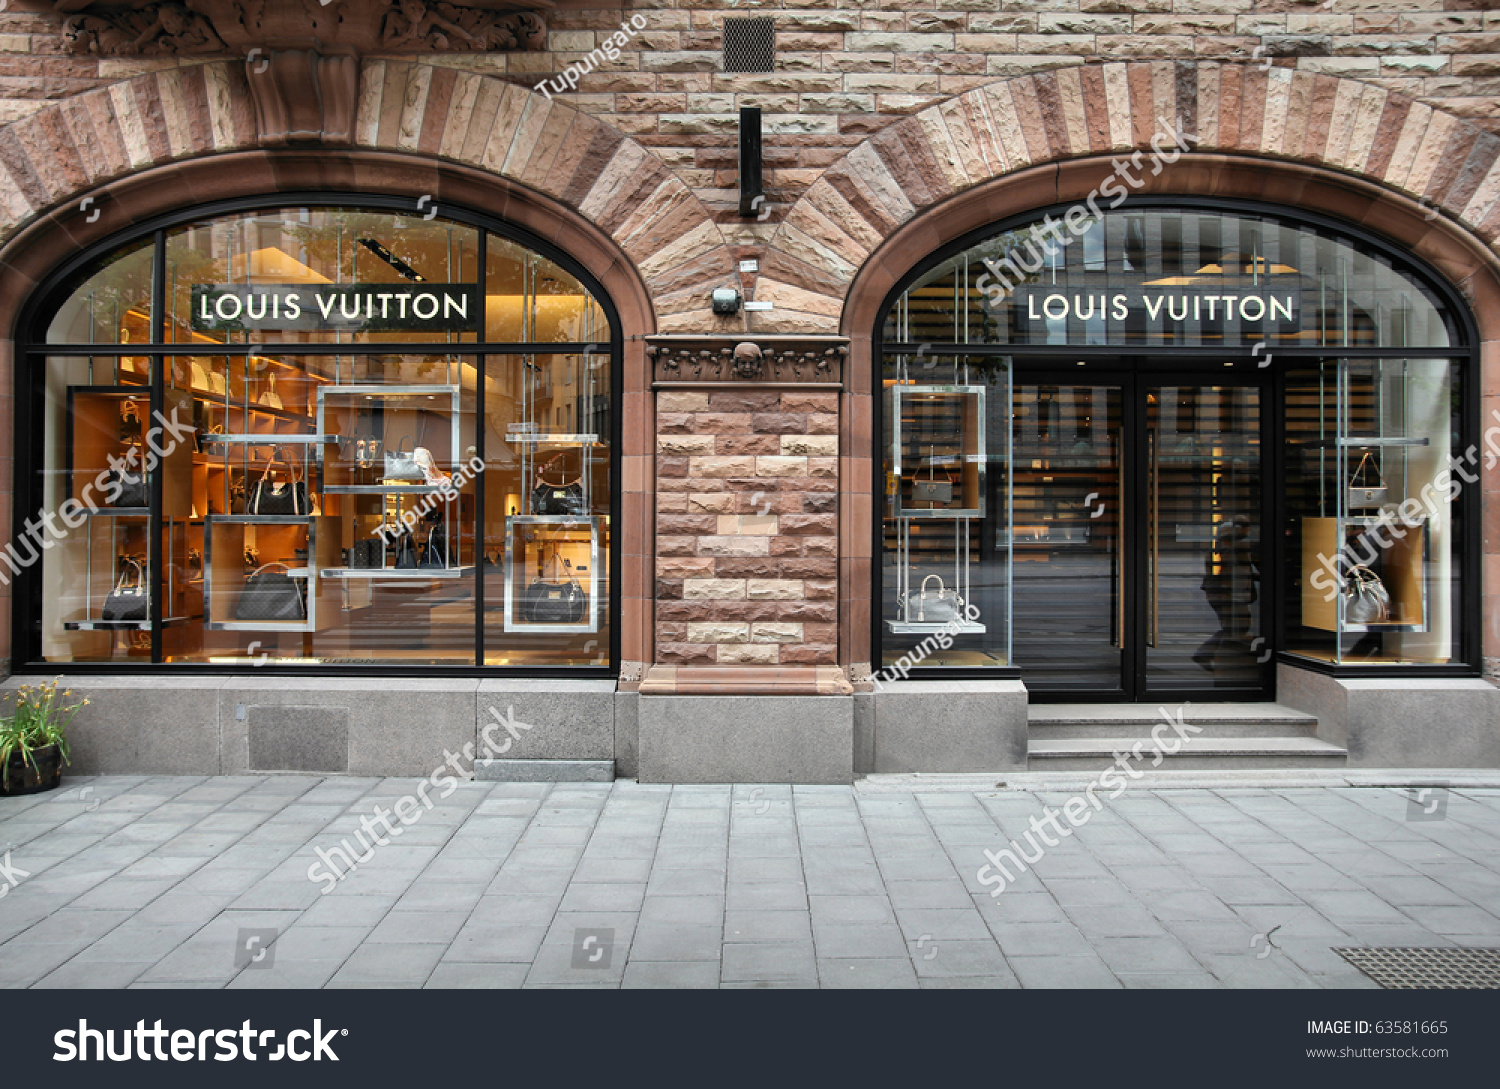 Stockholm - May 31: Louis Vuitton Store On May 31, 2010 In Stockholm. Forbes Says That Louis ...